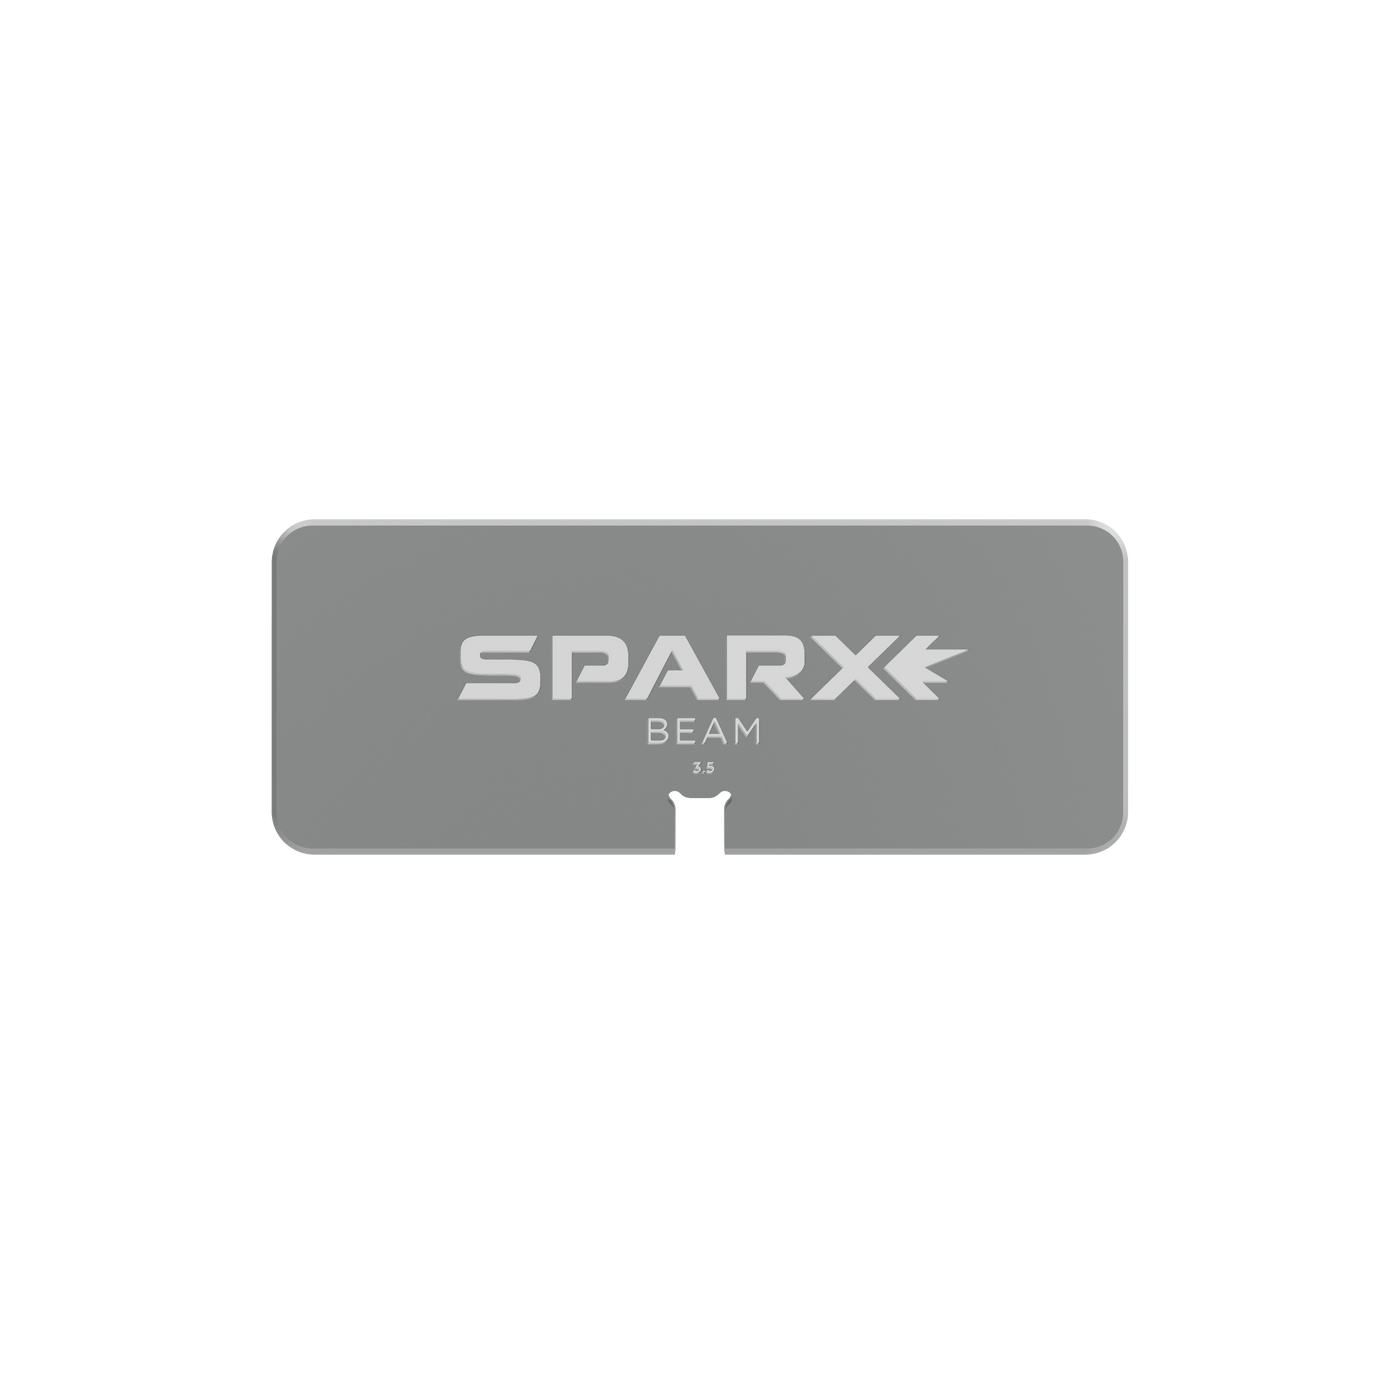 Sparx Sharpening Beam Laser - The Hockey Shop Source For Sports